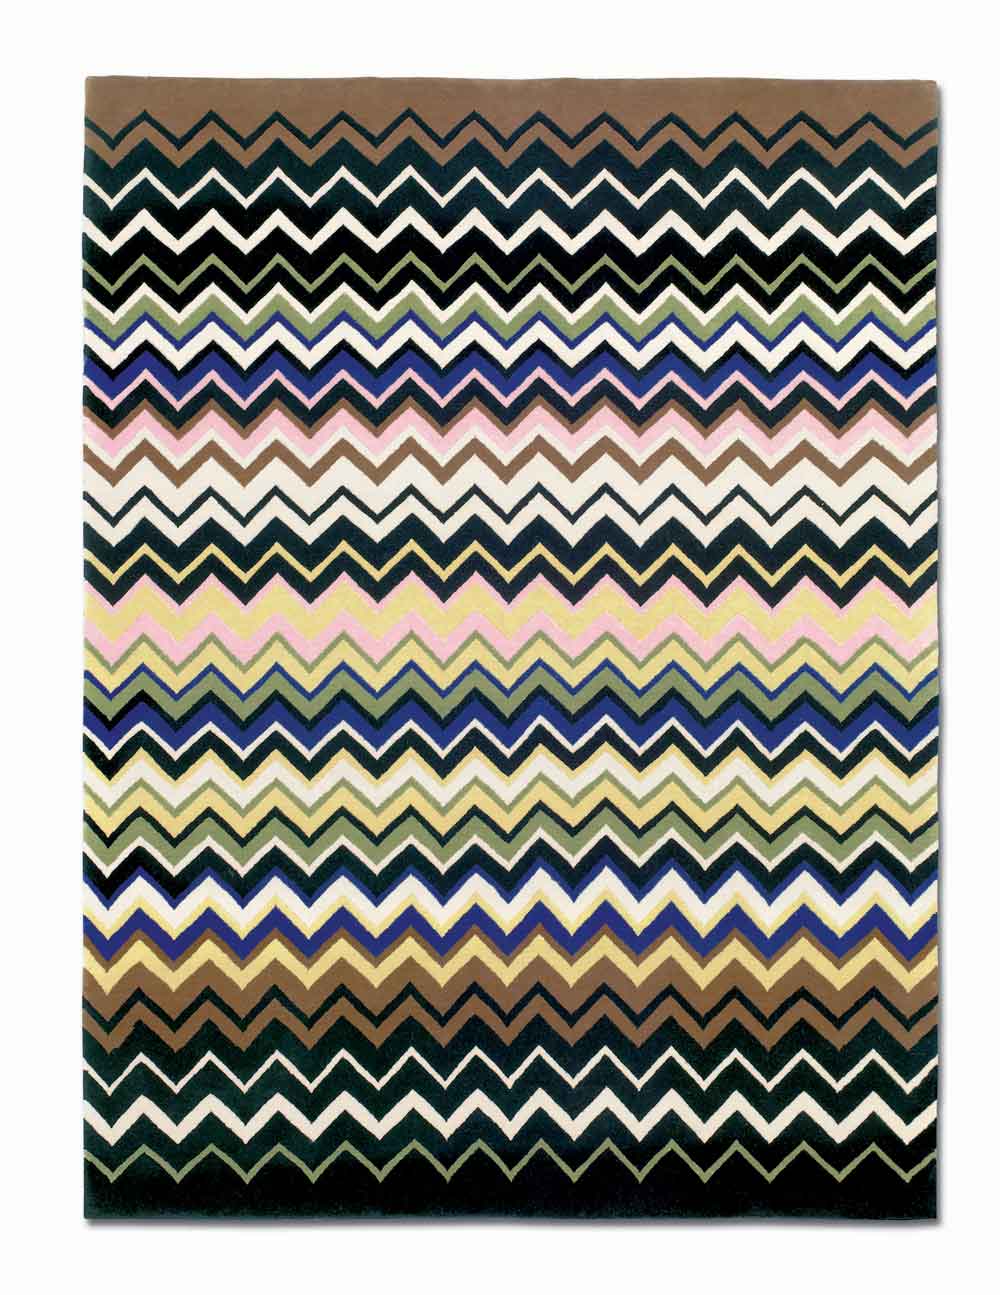 The classic Missoni zig-zag pattern appears as part of their home-ware 